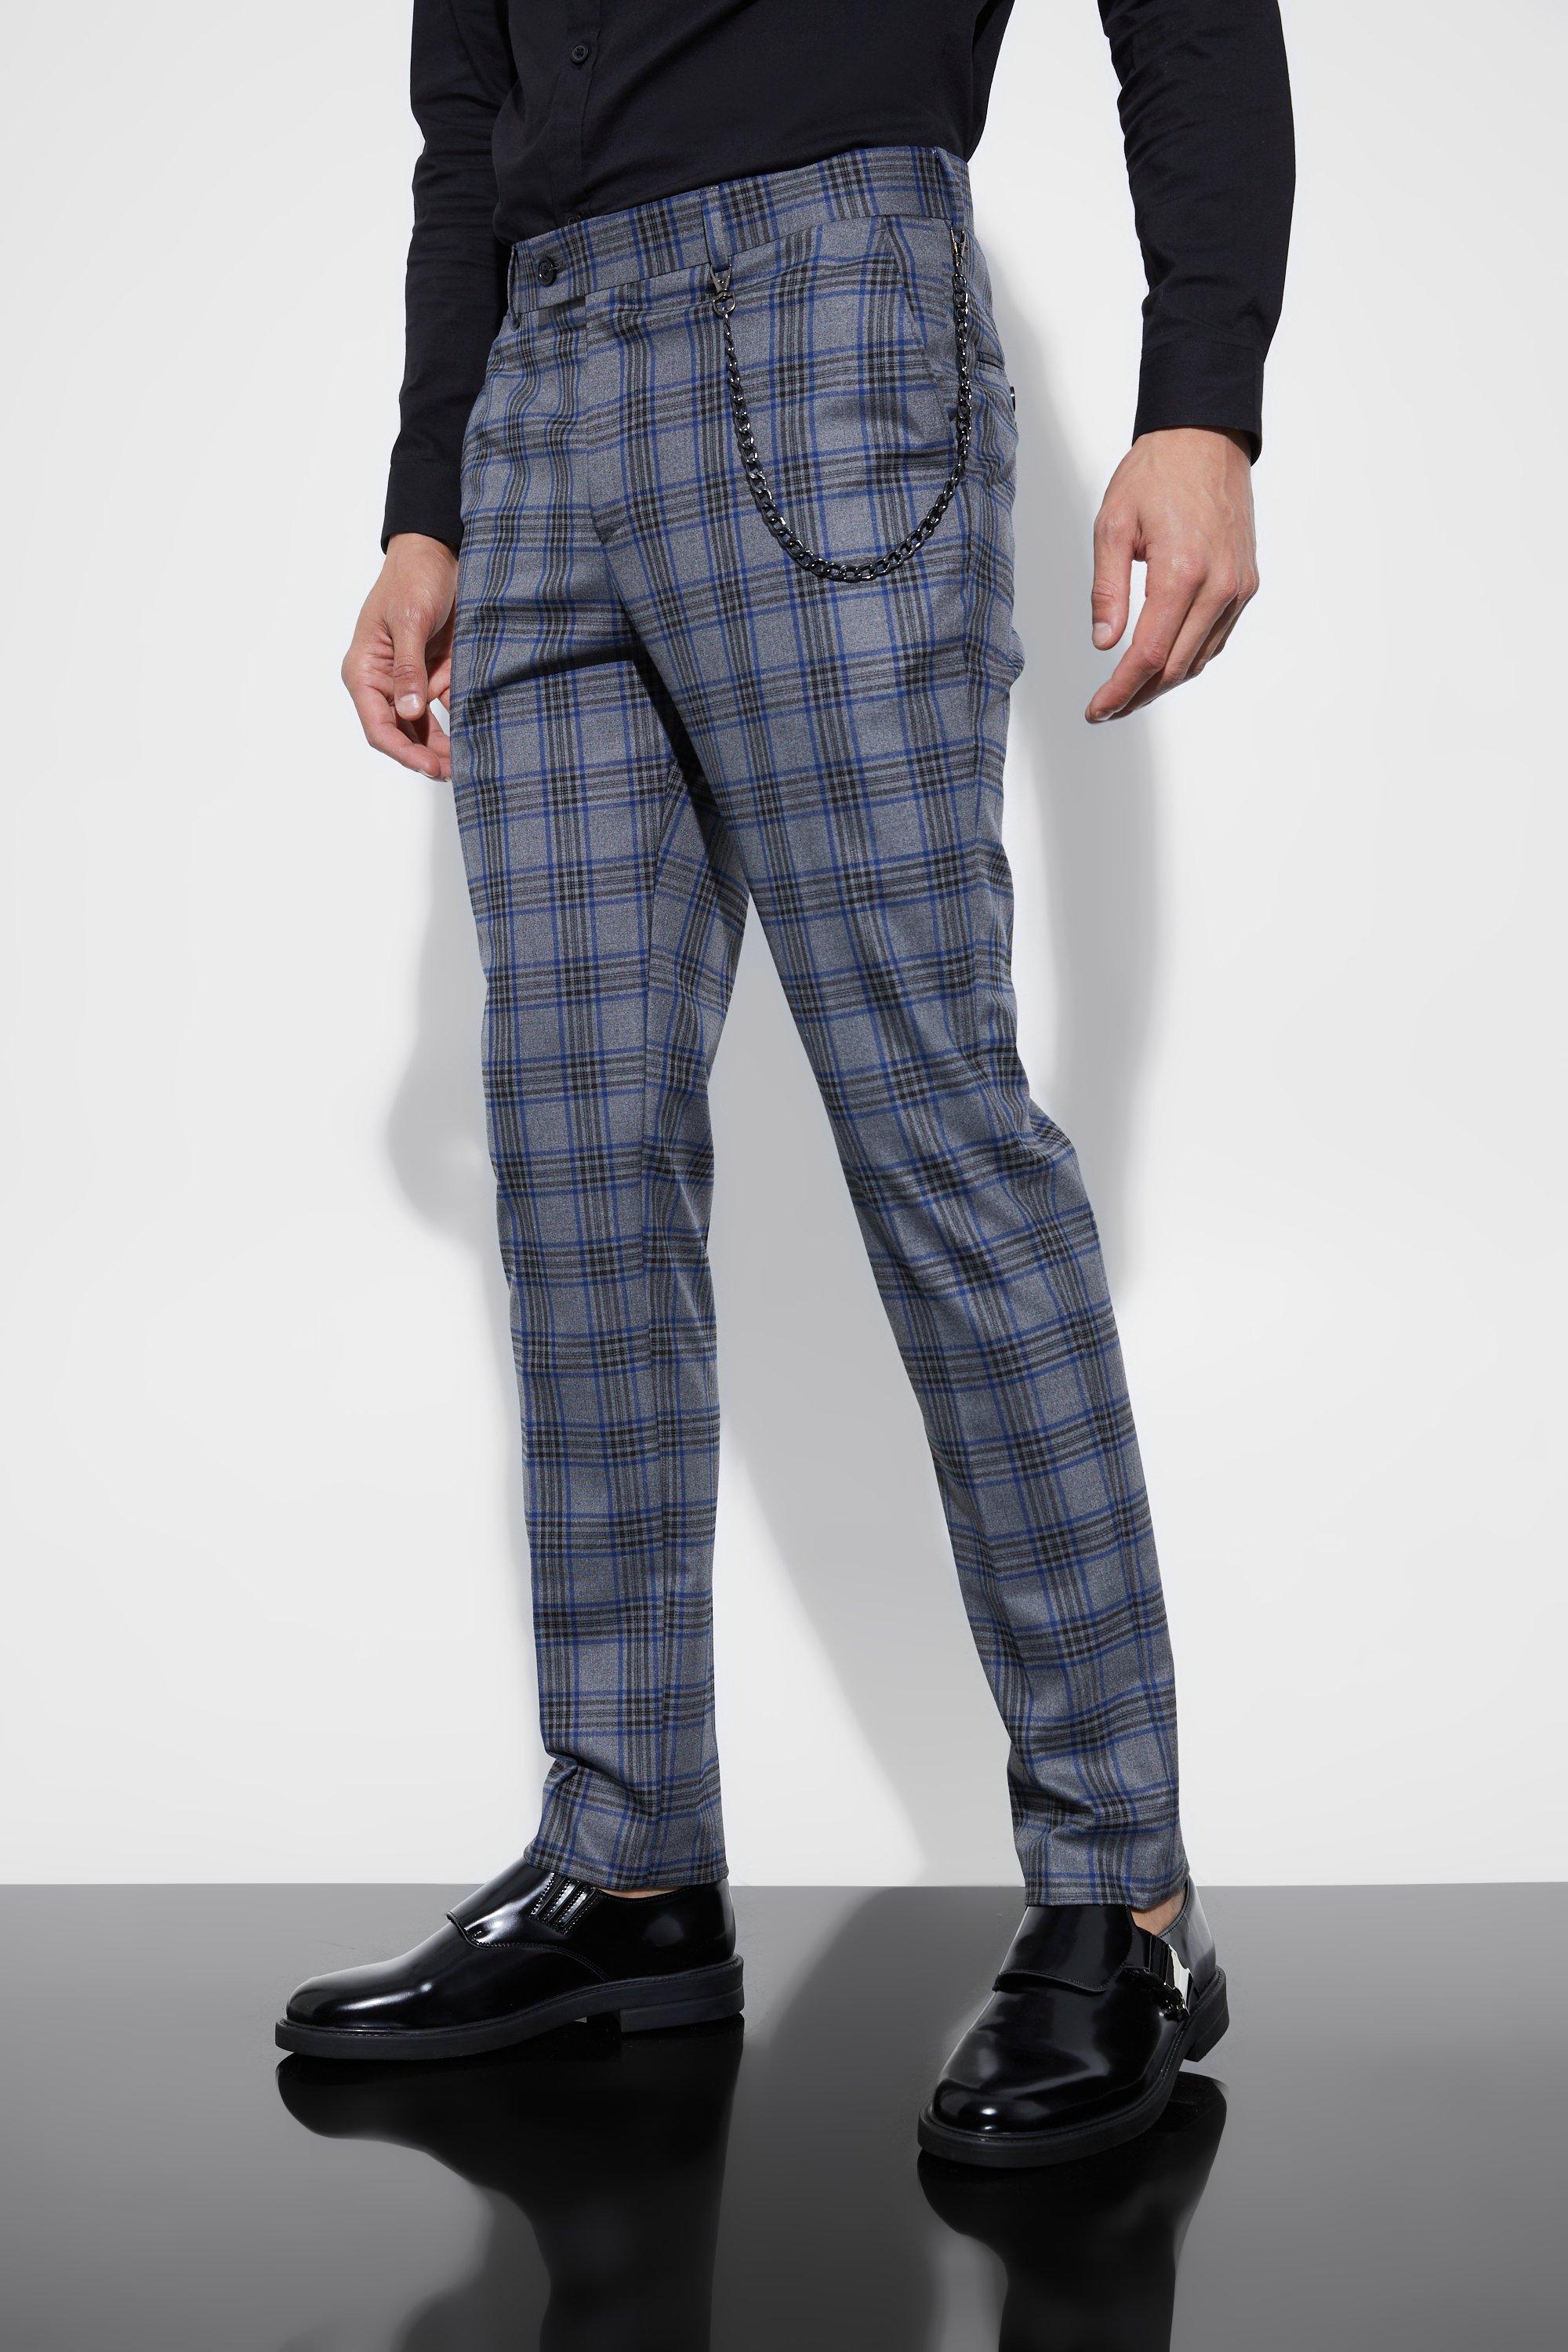 MAUVAIS Grey Check Cropped Trousers with Detachable Chain - MAUVAIS